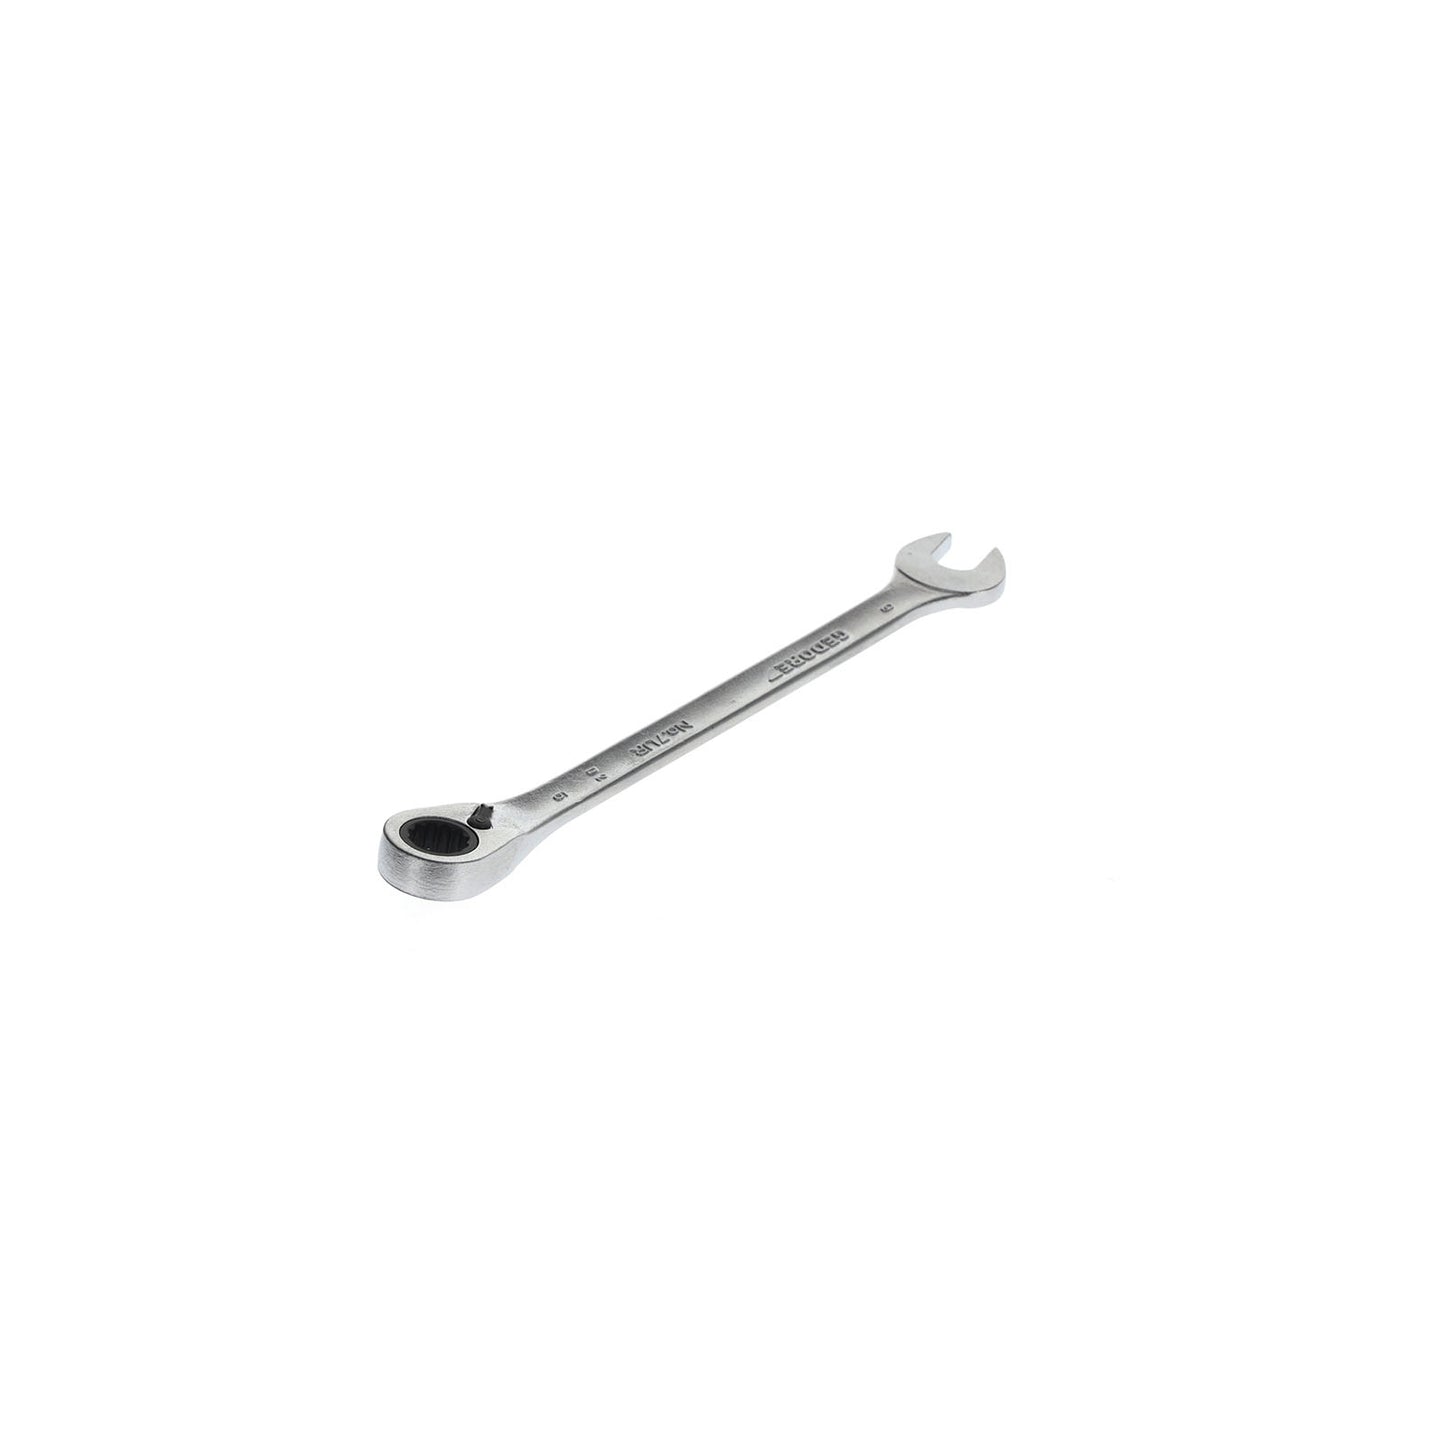 GEDORE 7 UR 9 - Ratchet combination wrench, 9mm (2297264)